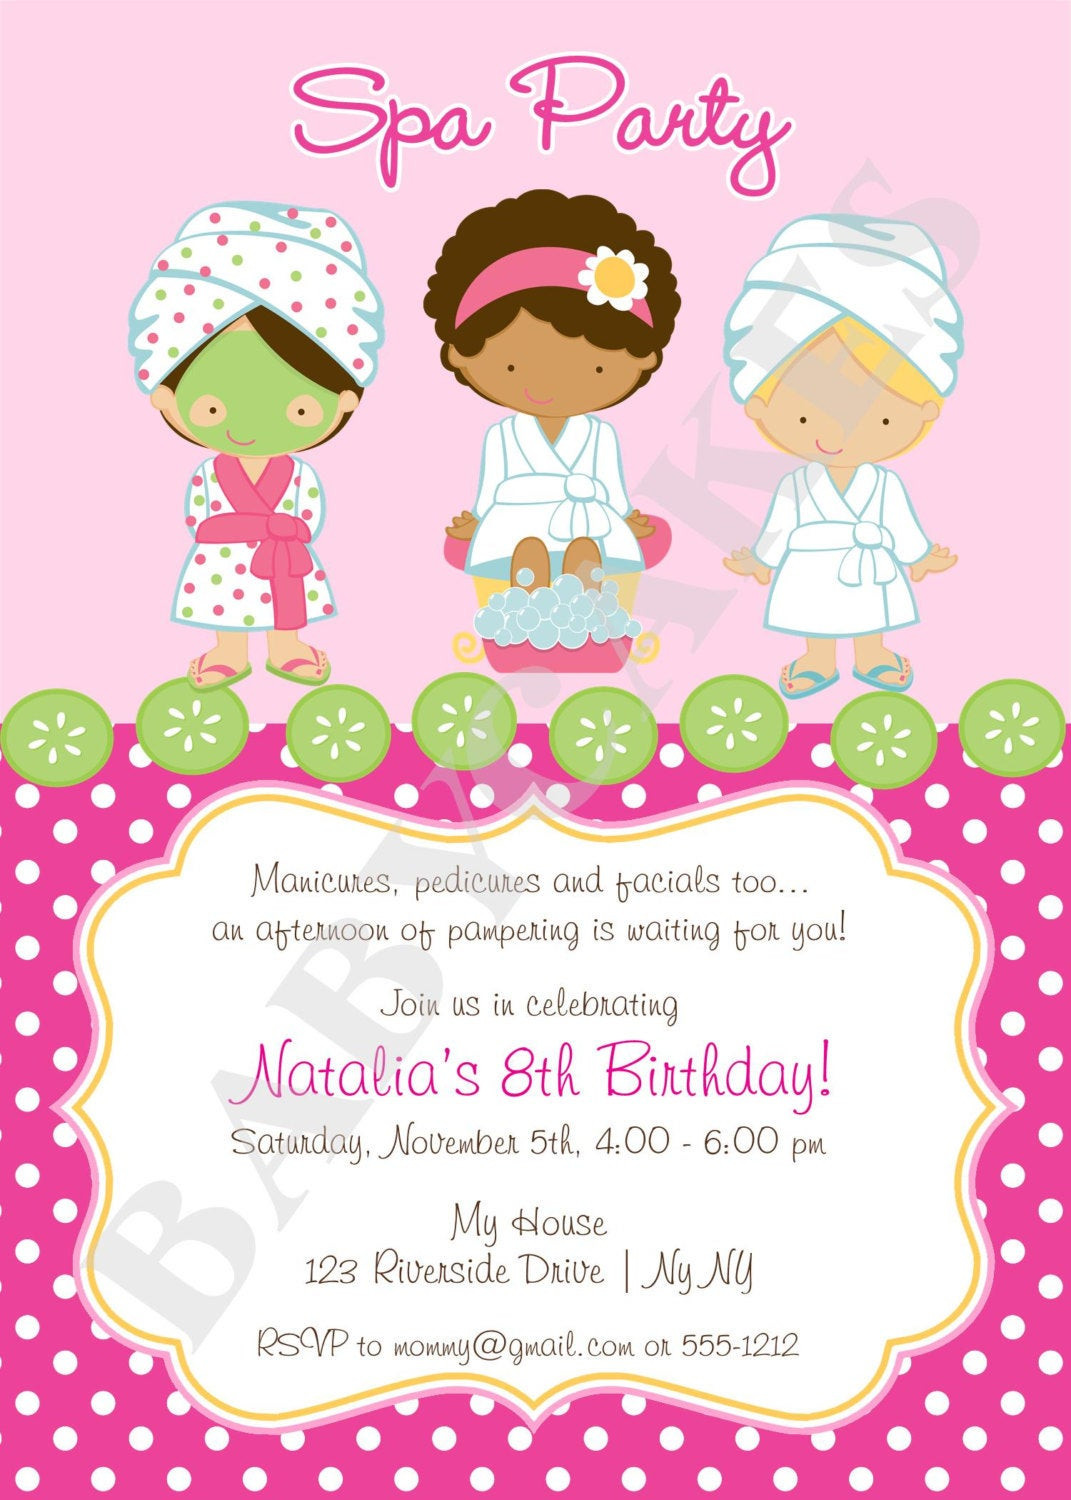 Spa Birthday Party Invitations
 Spa Party Invitation DIY Print Your Own Matching by